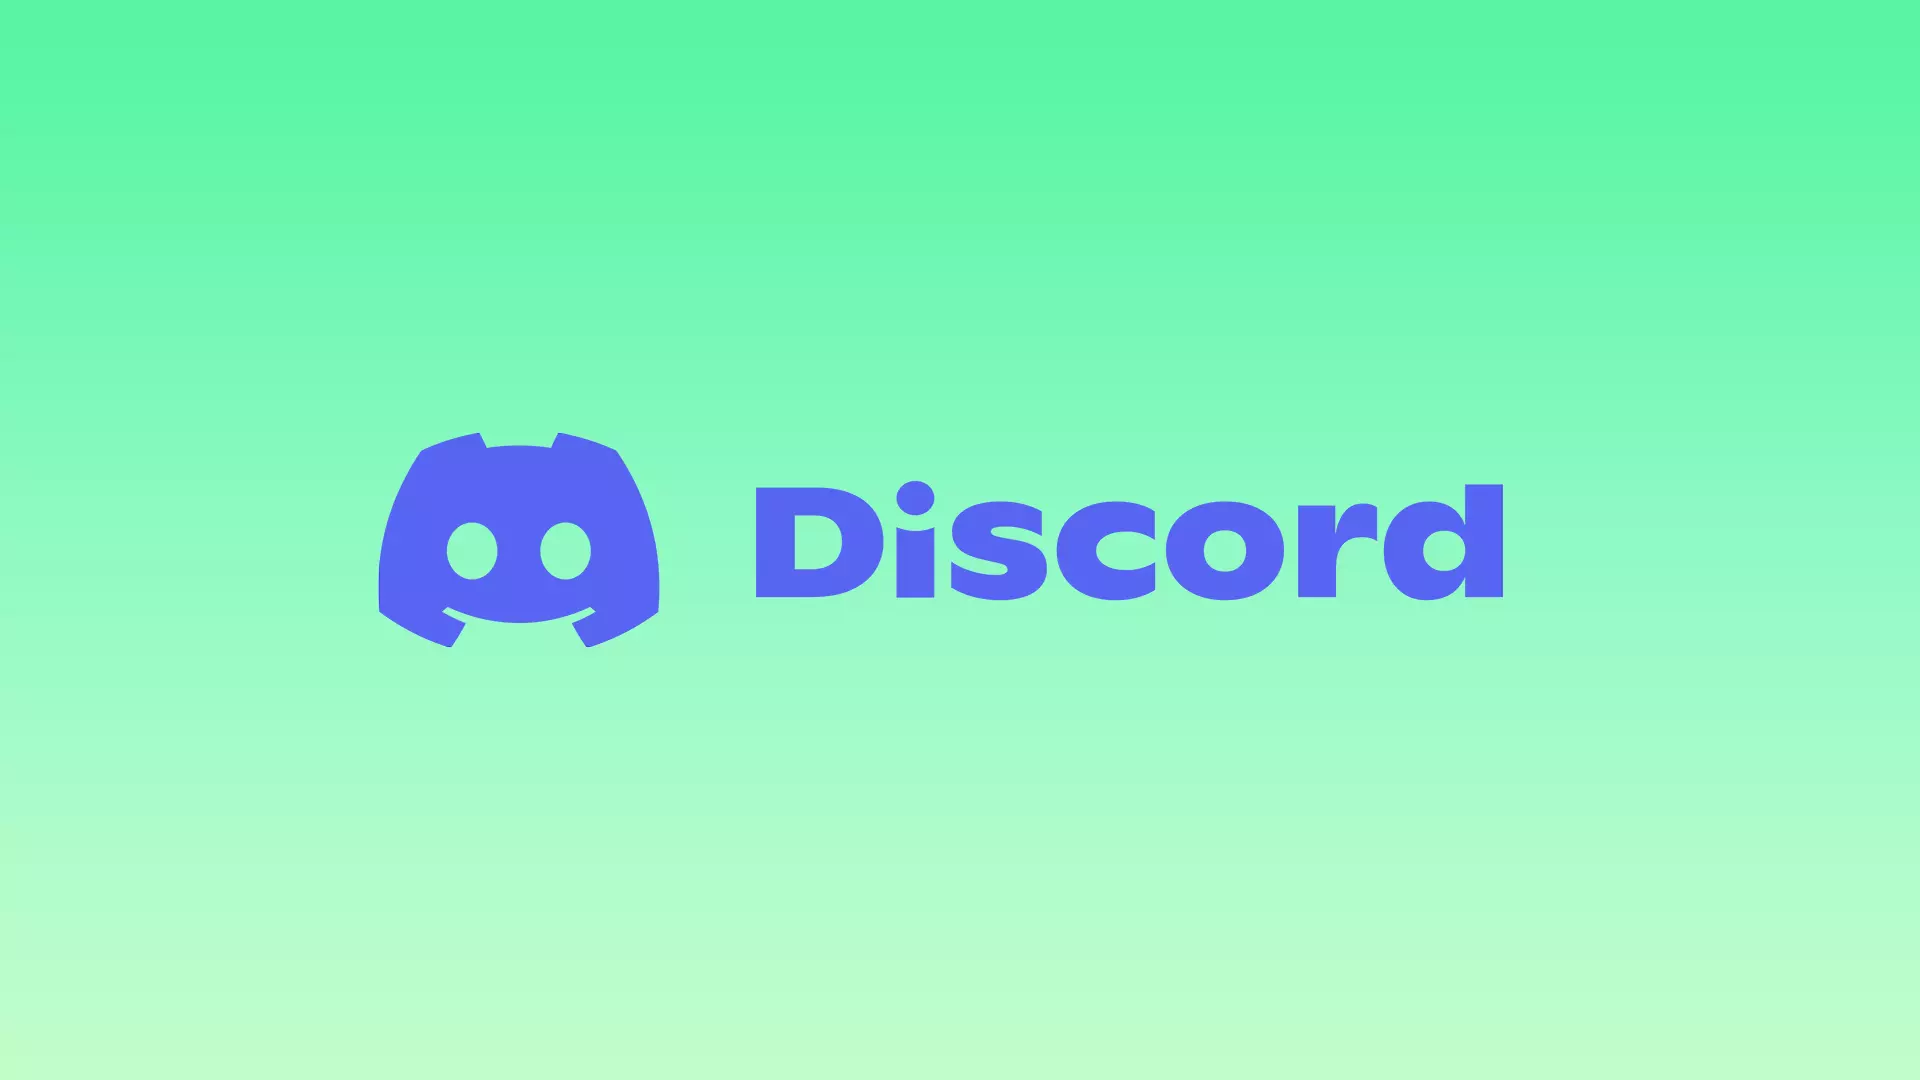 How to edit your status in Discord